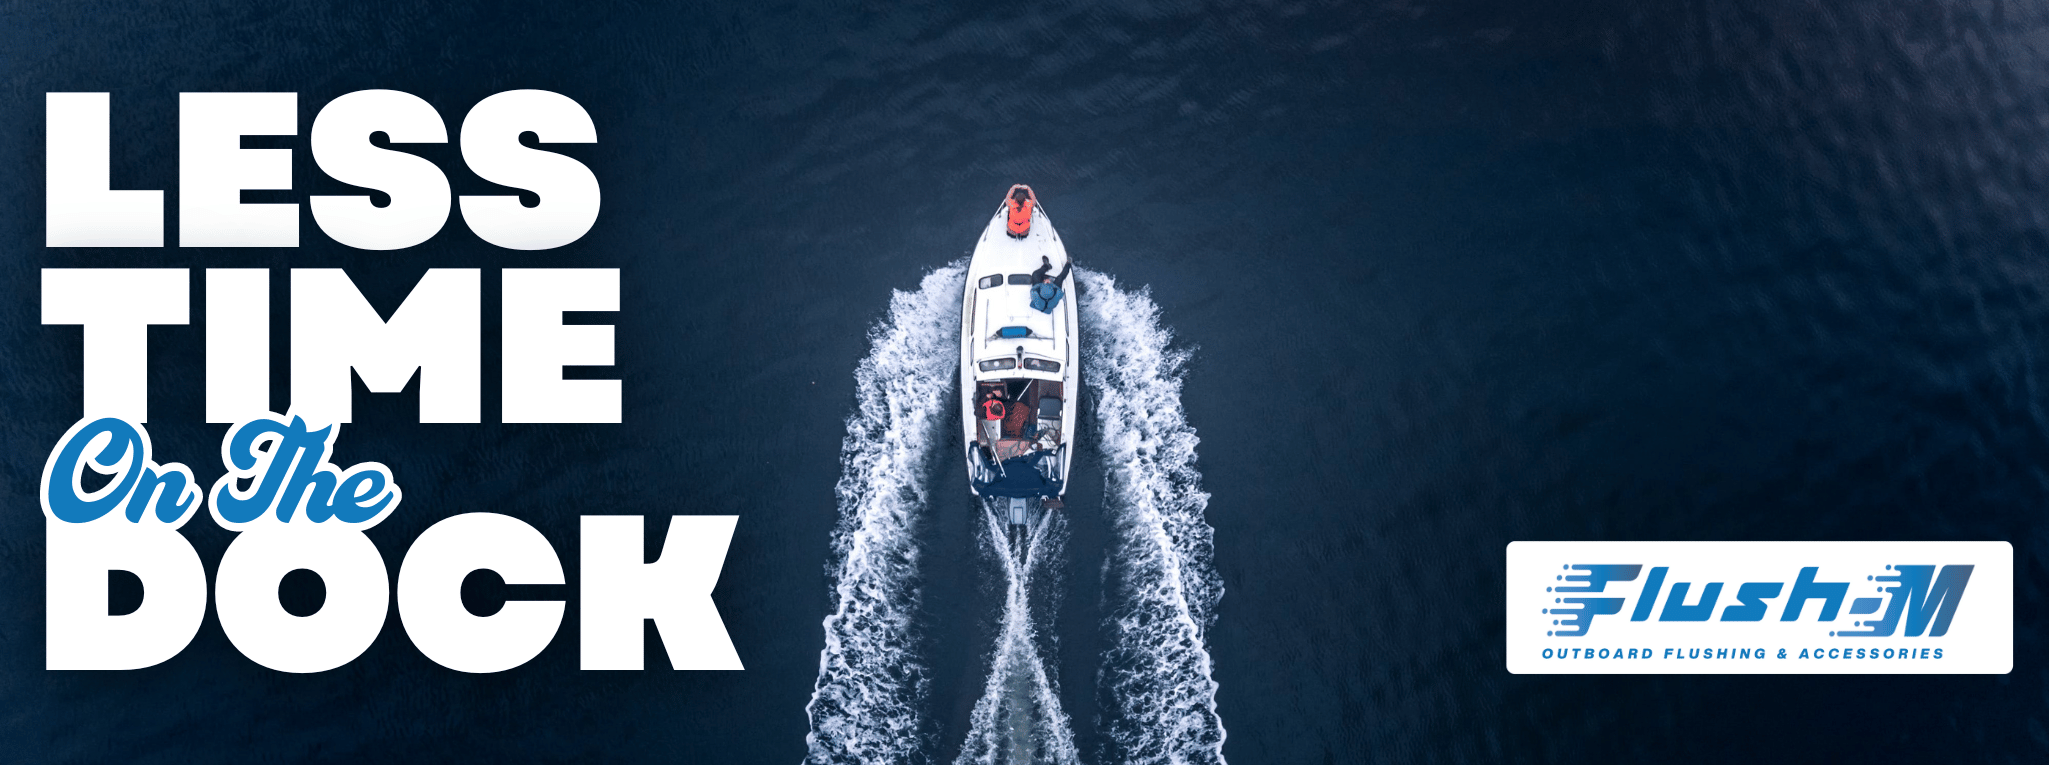 A boat swiftly moving across dark blue ocean waters with the words 'Less Time On The Dock' and the Flush-M logo overlayed.